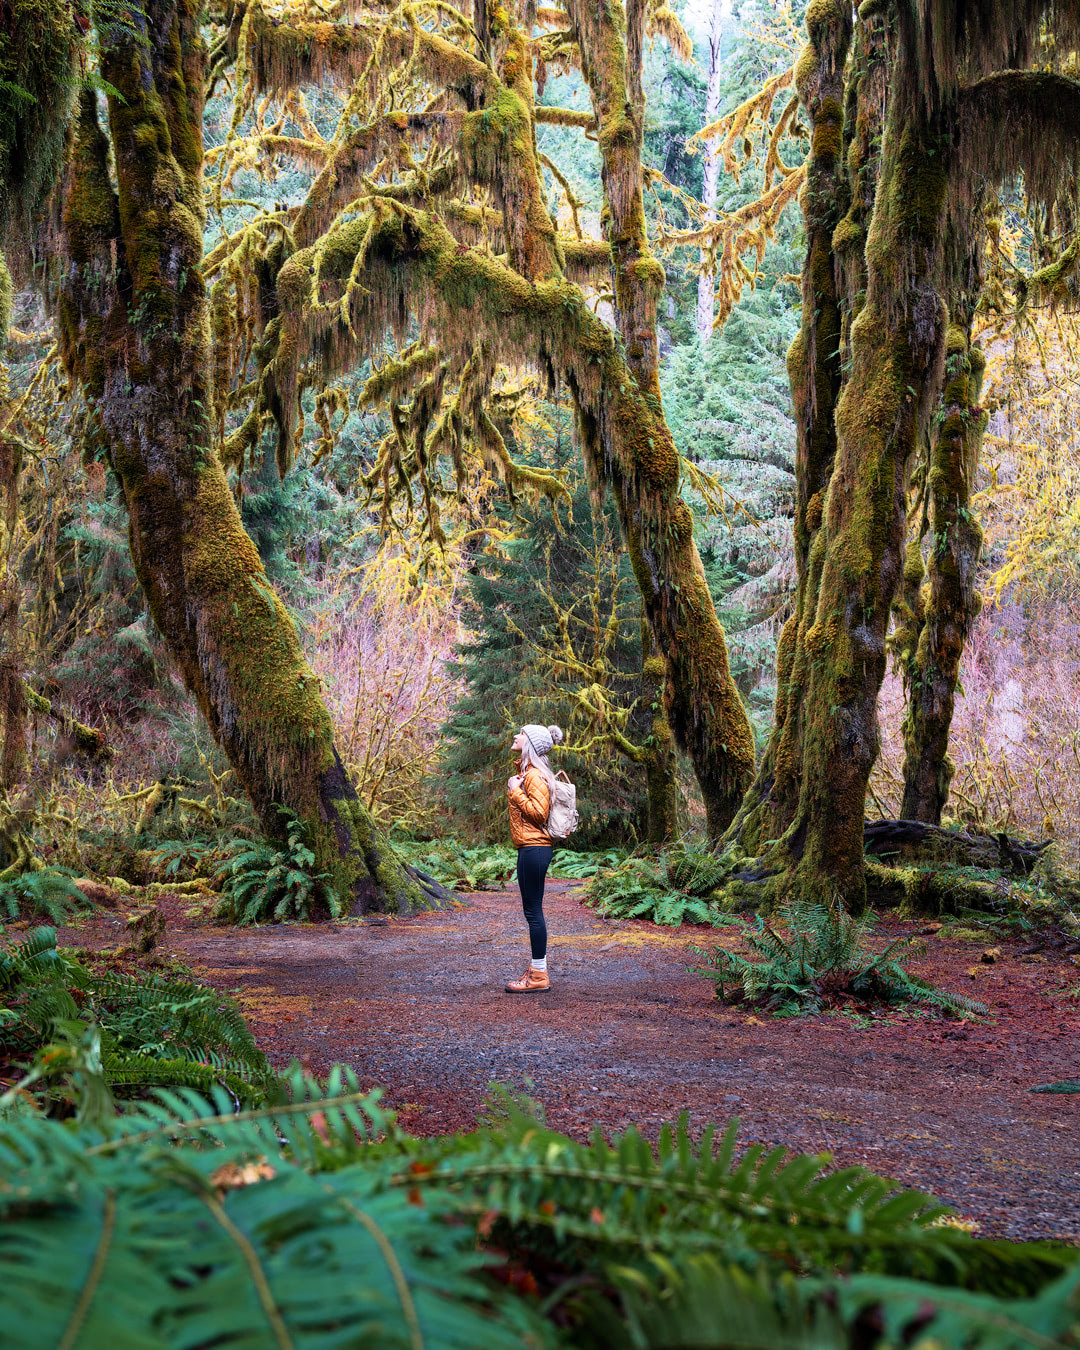 Beginner Friendly Hikes in Washington State - Hoh Rainforest Hall of Mosses Trail